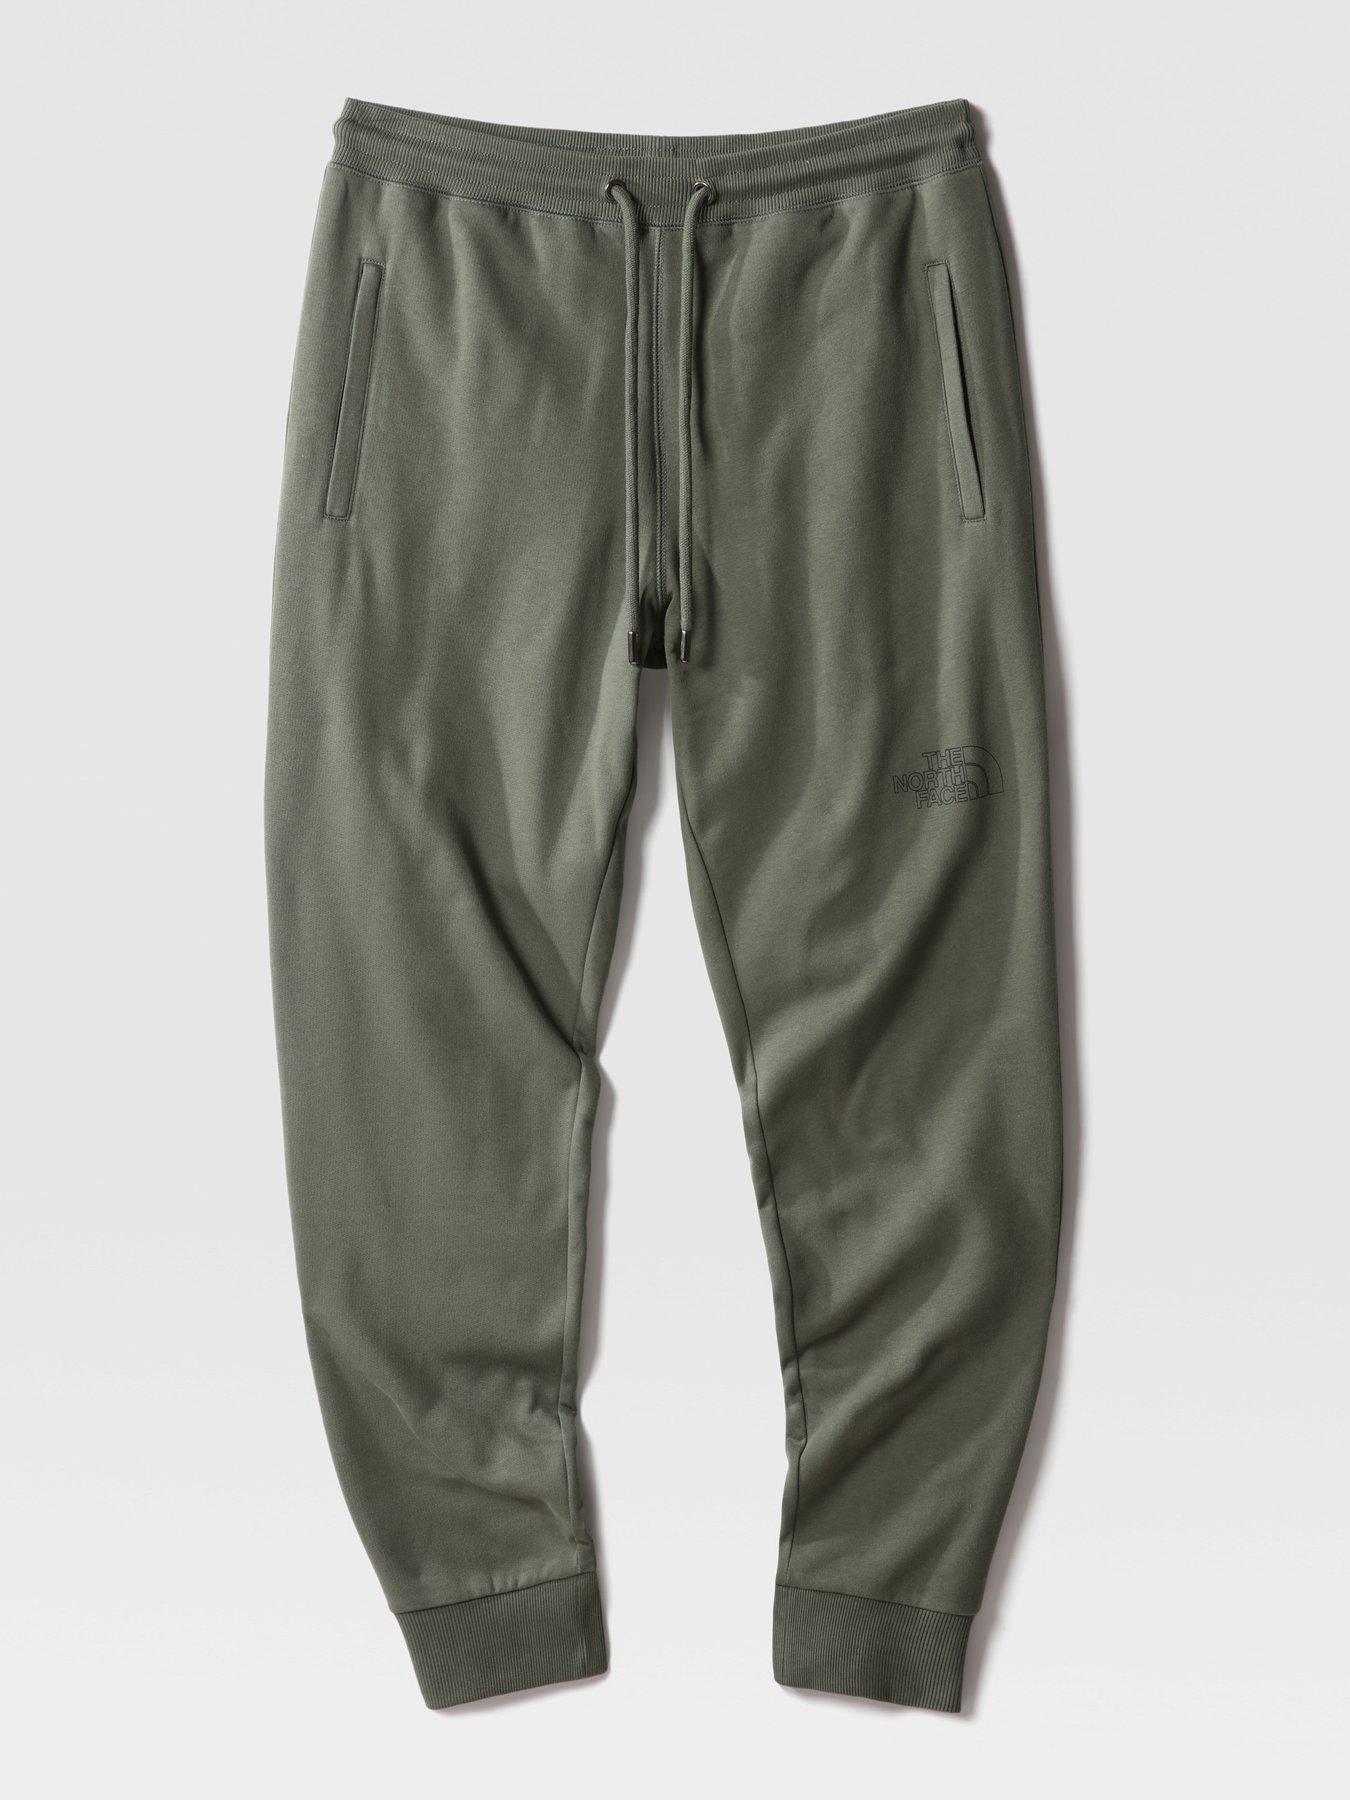 THE NORTH FACE Drew Peak Pants - Green | very.co.uk